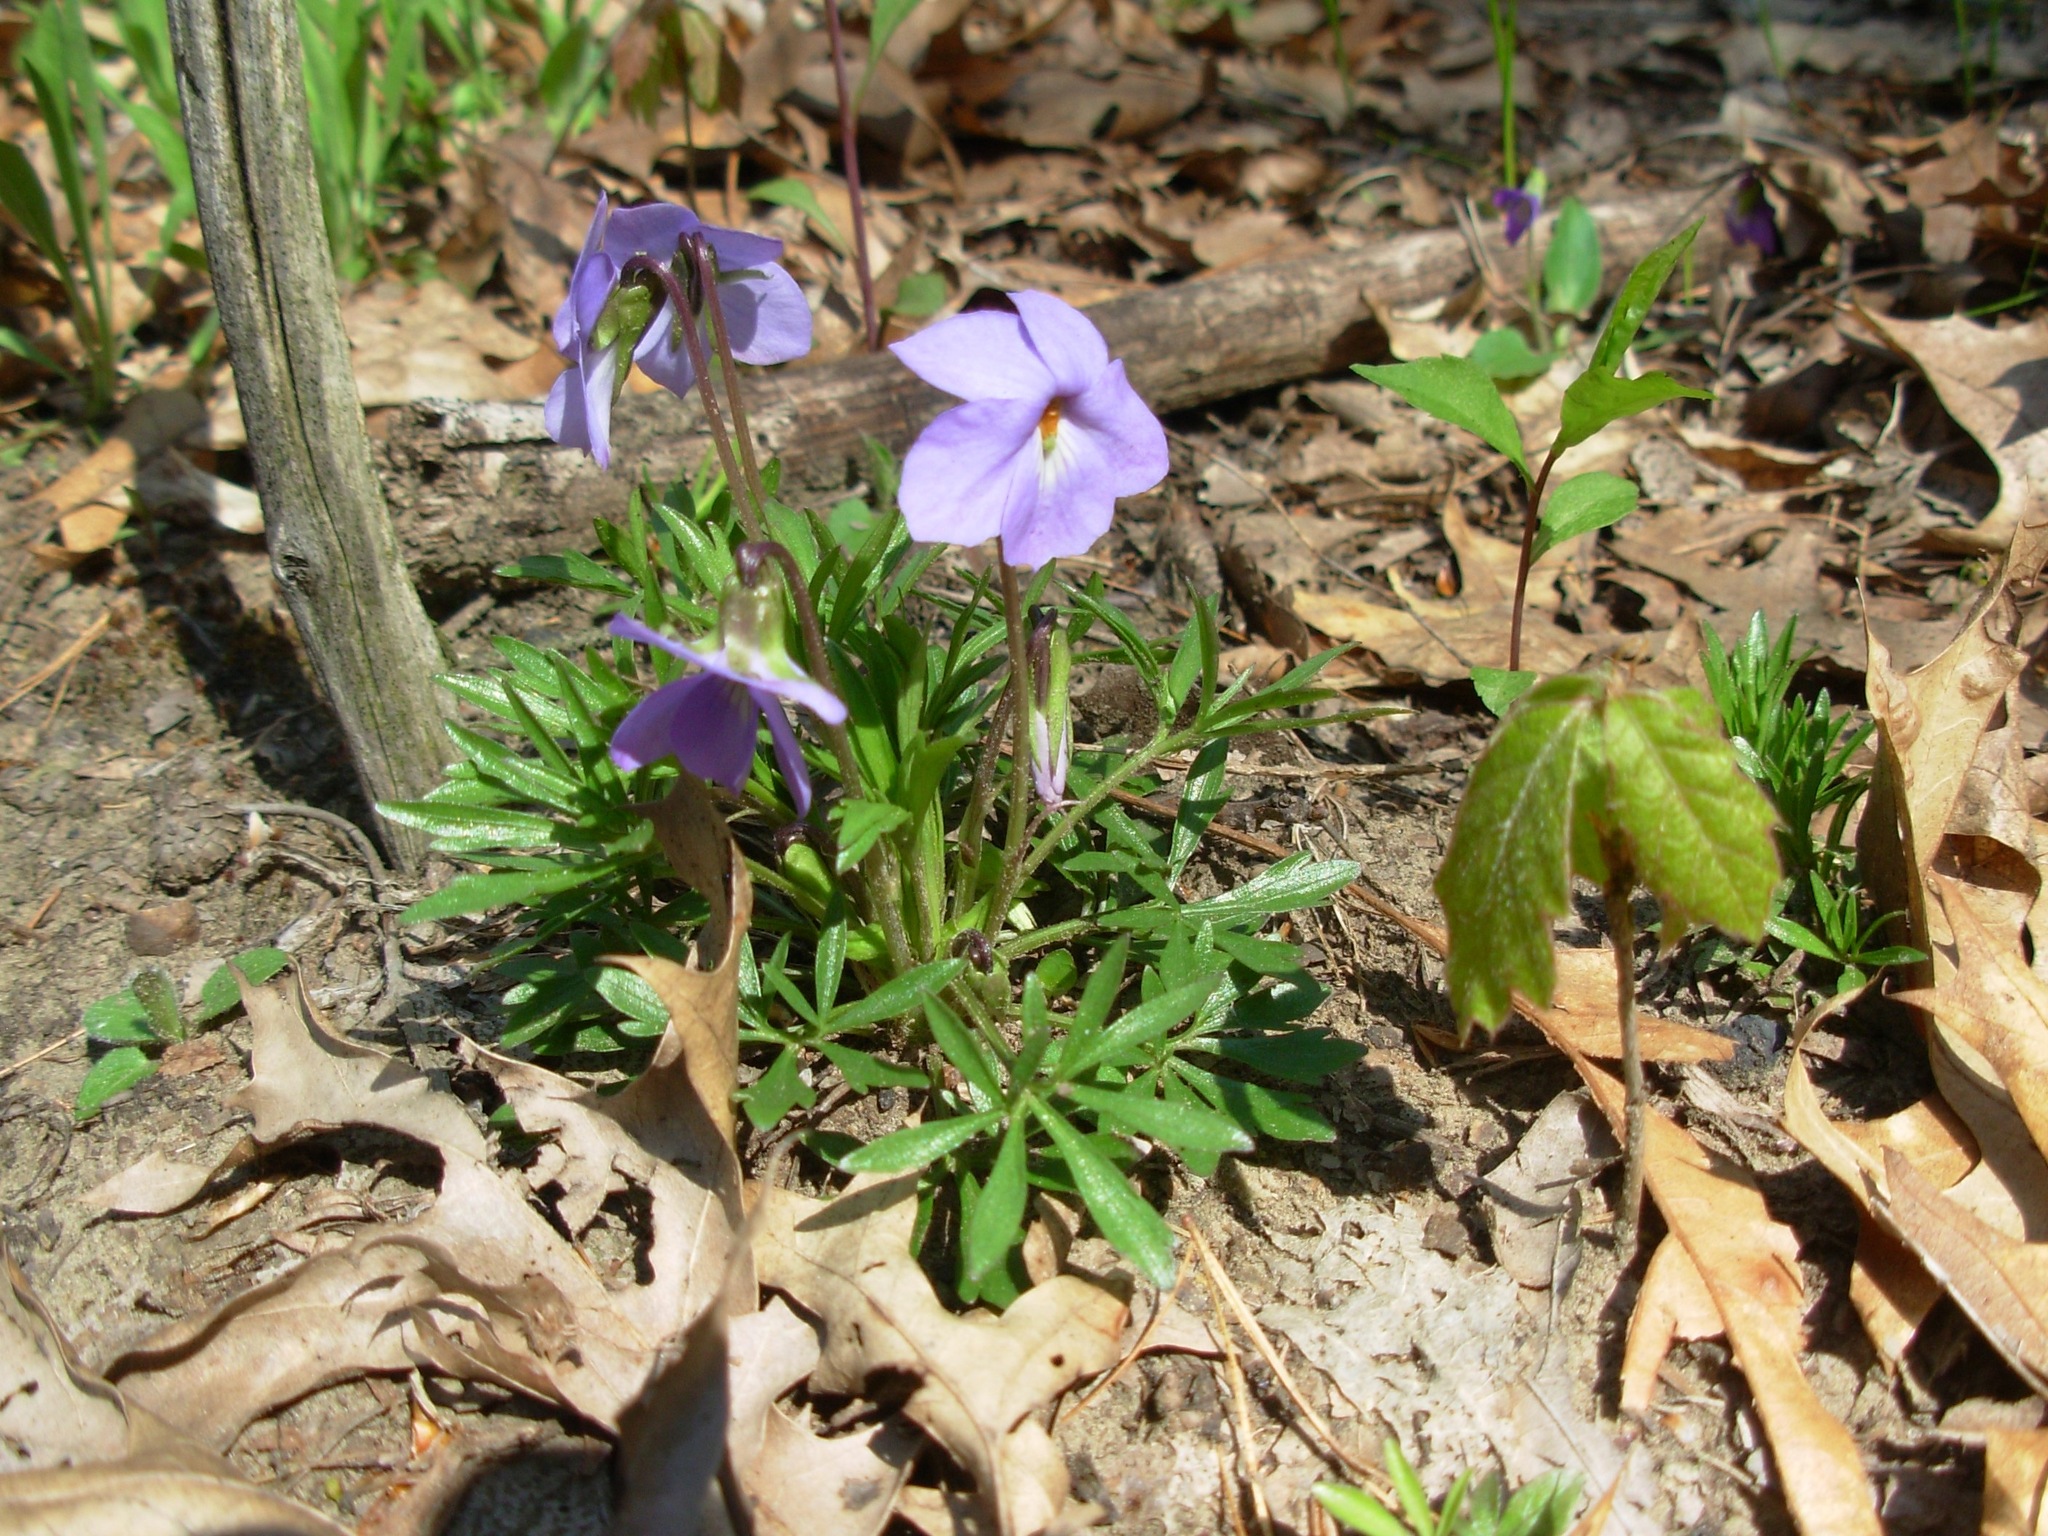 A photograph of the Bird’s-foot Violet